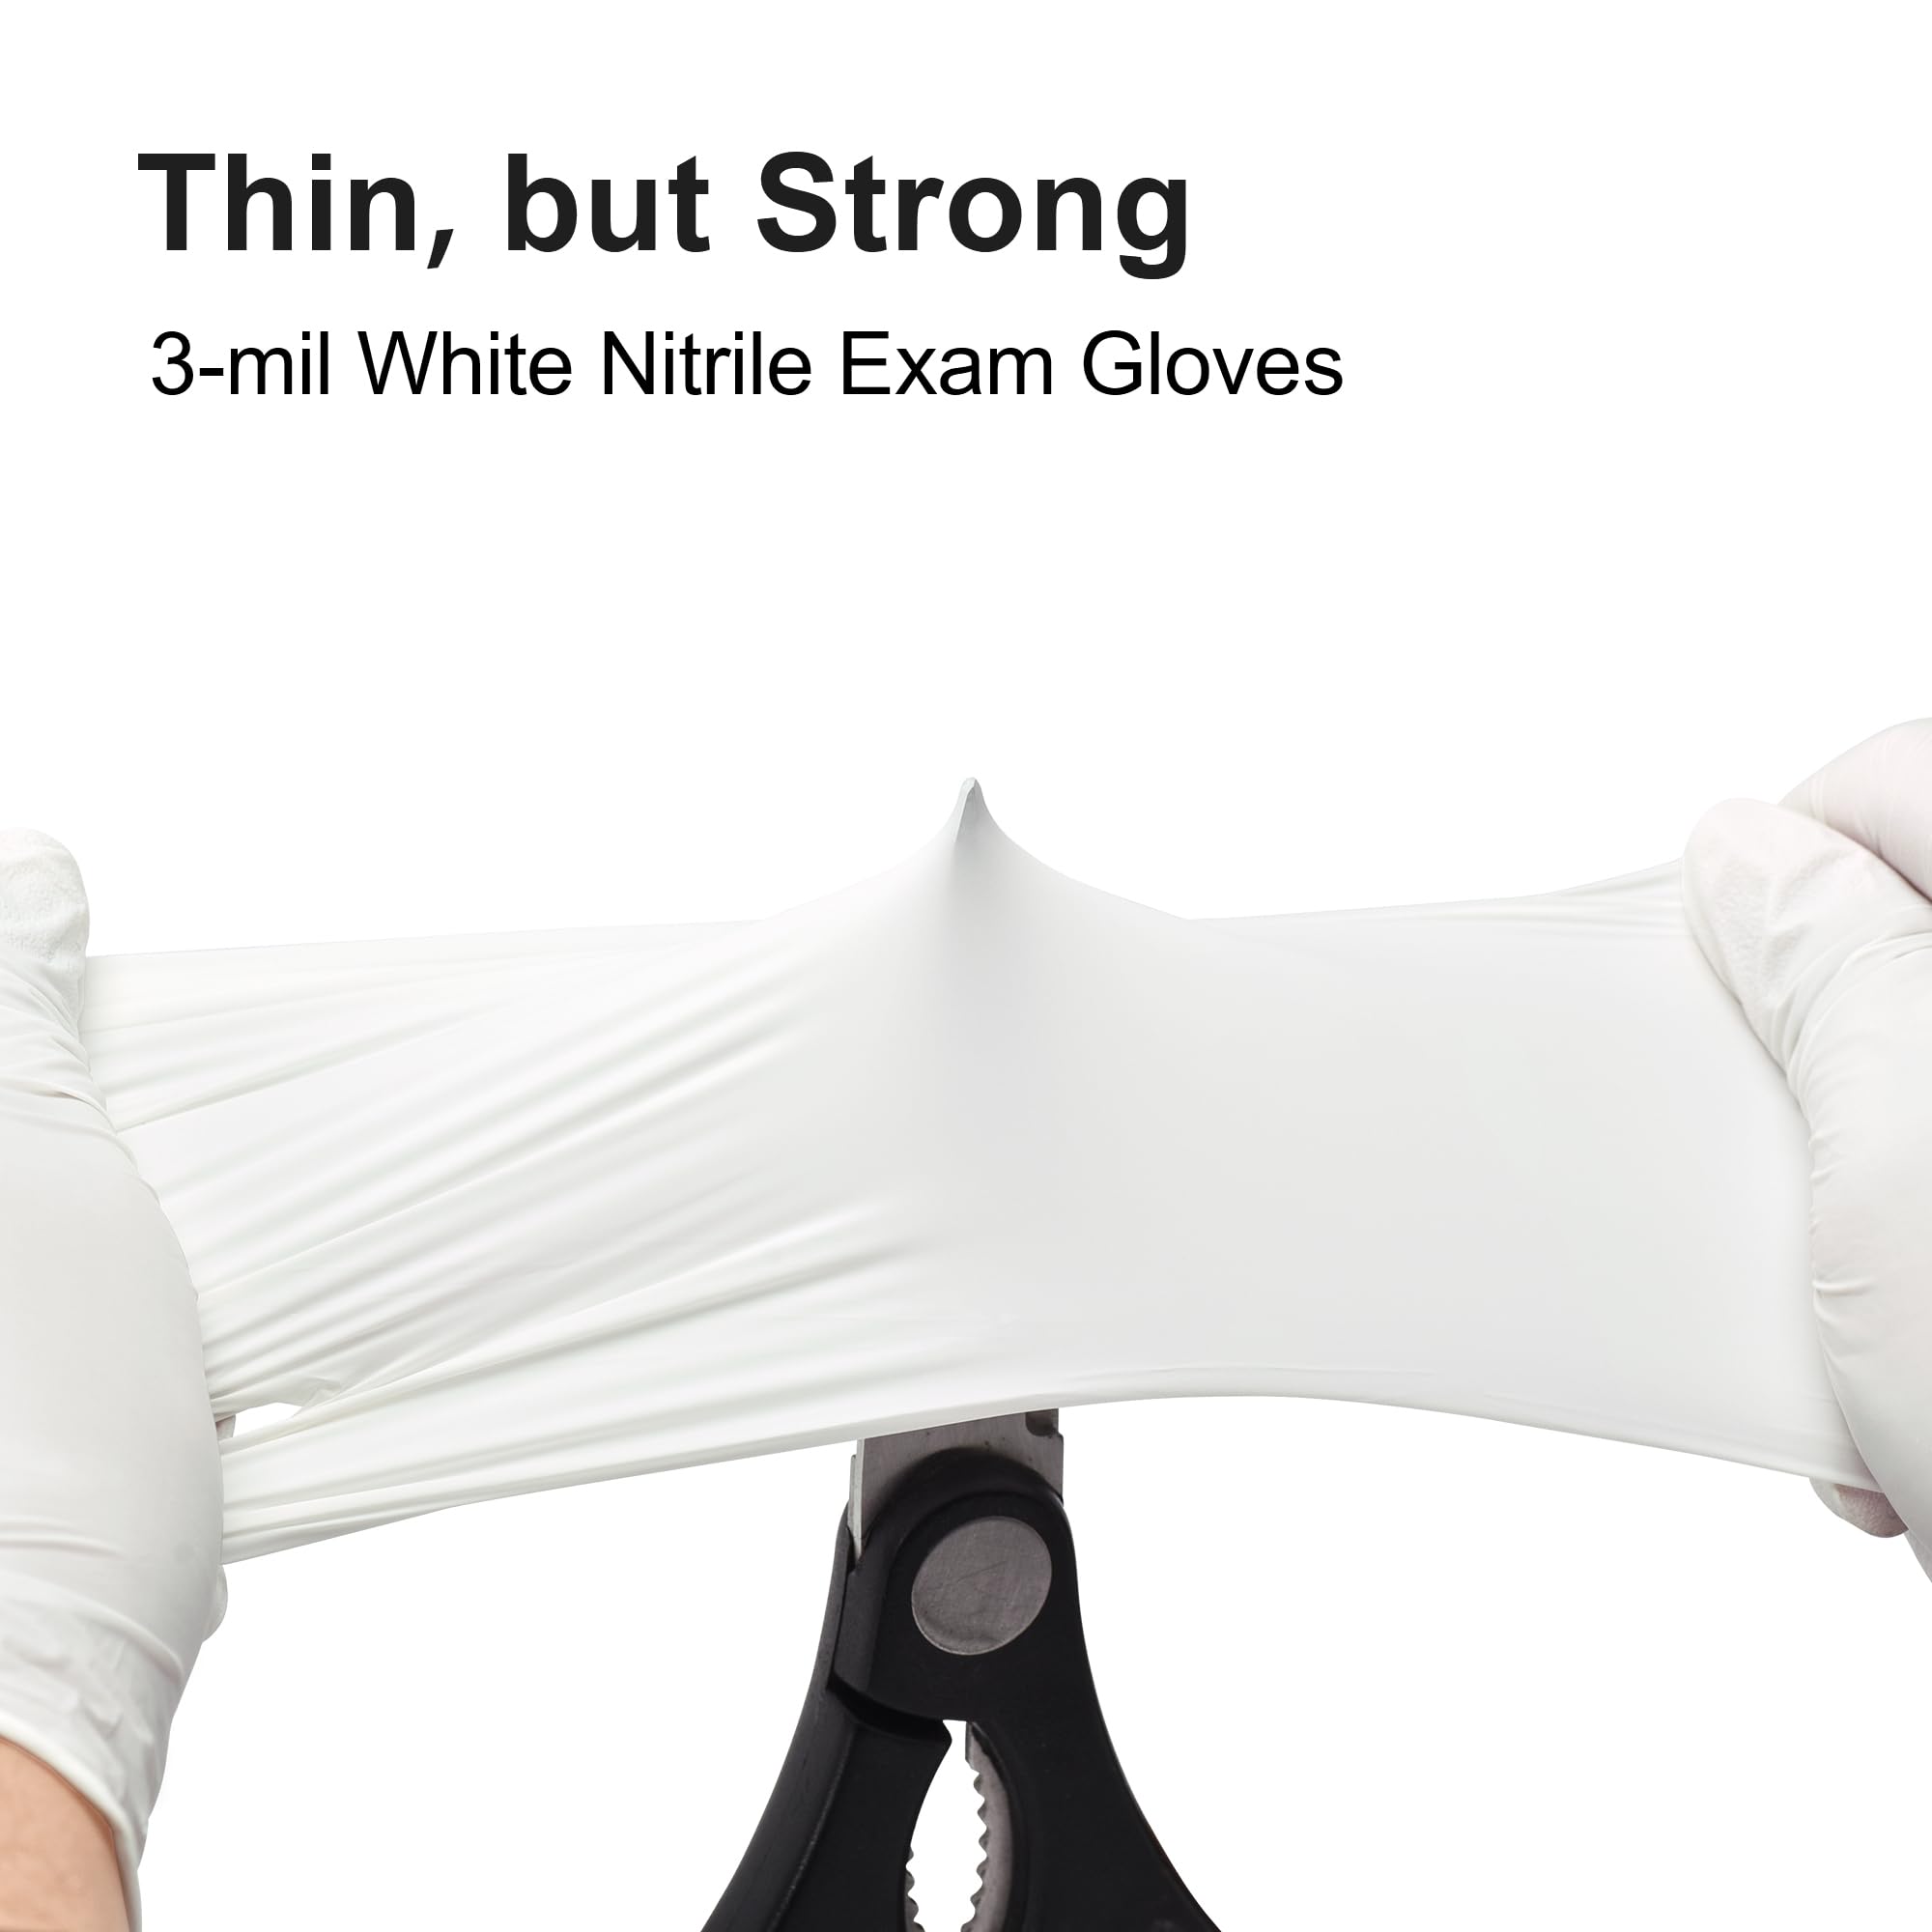 SwiftGrip Disposable Nitrile Exam Gloves, 3-mil, Small, Box of 100, White Nitrile Gloves Disposable Latex Free for Medical, Cleaning, Cooking & Esthetician, Food-Safe, Powder-Free, Non-Sterile